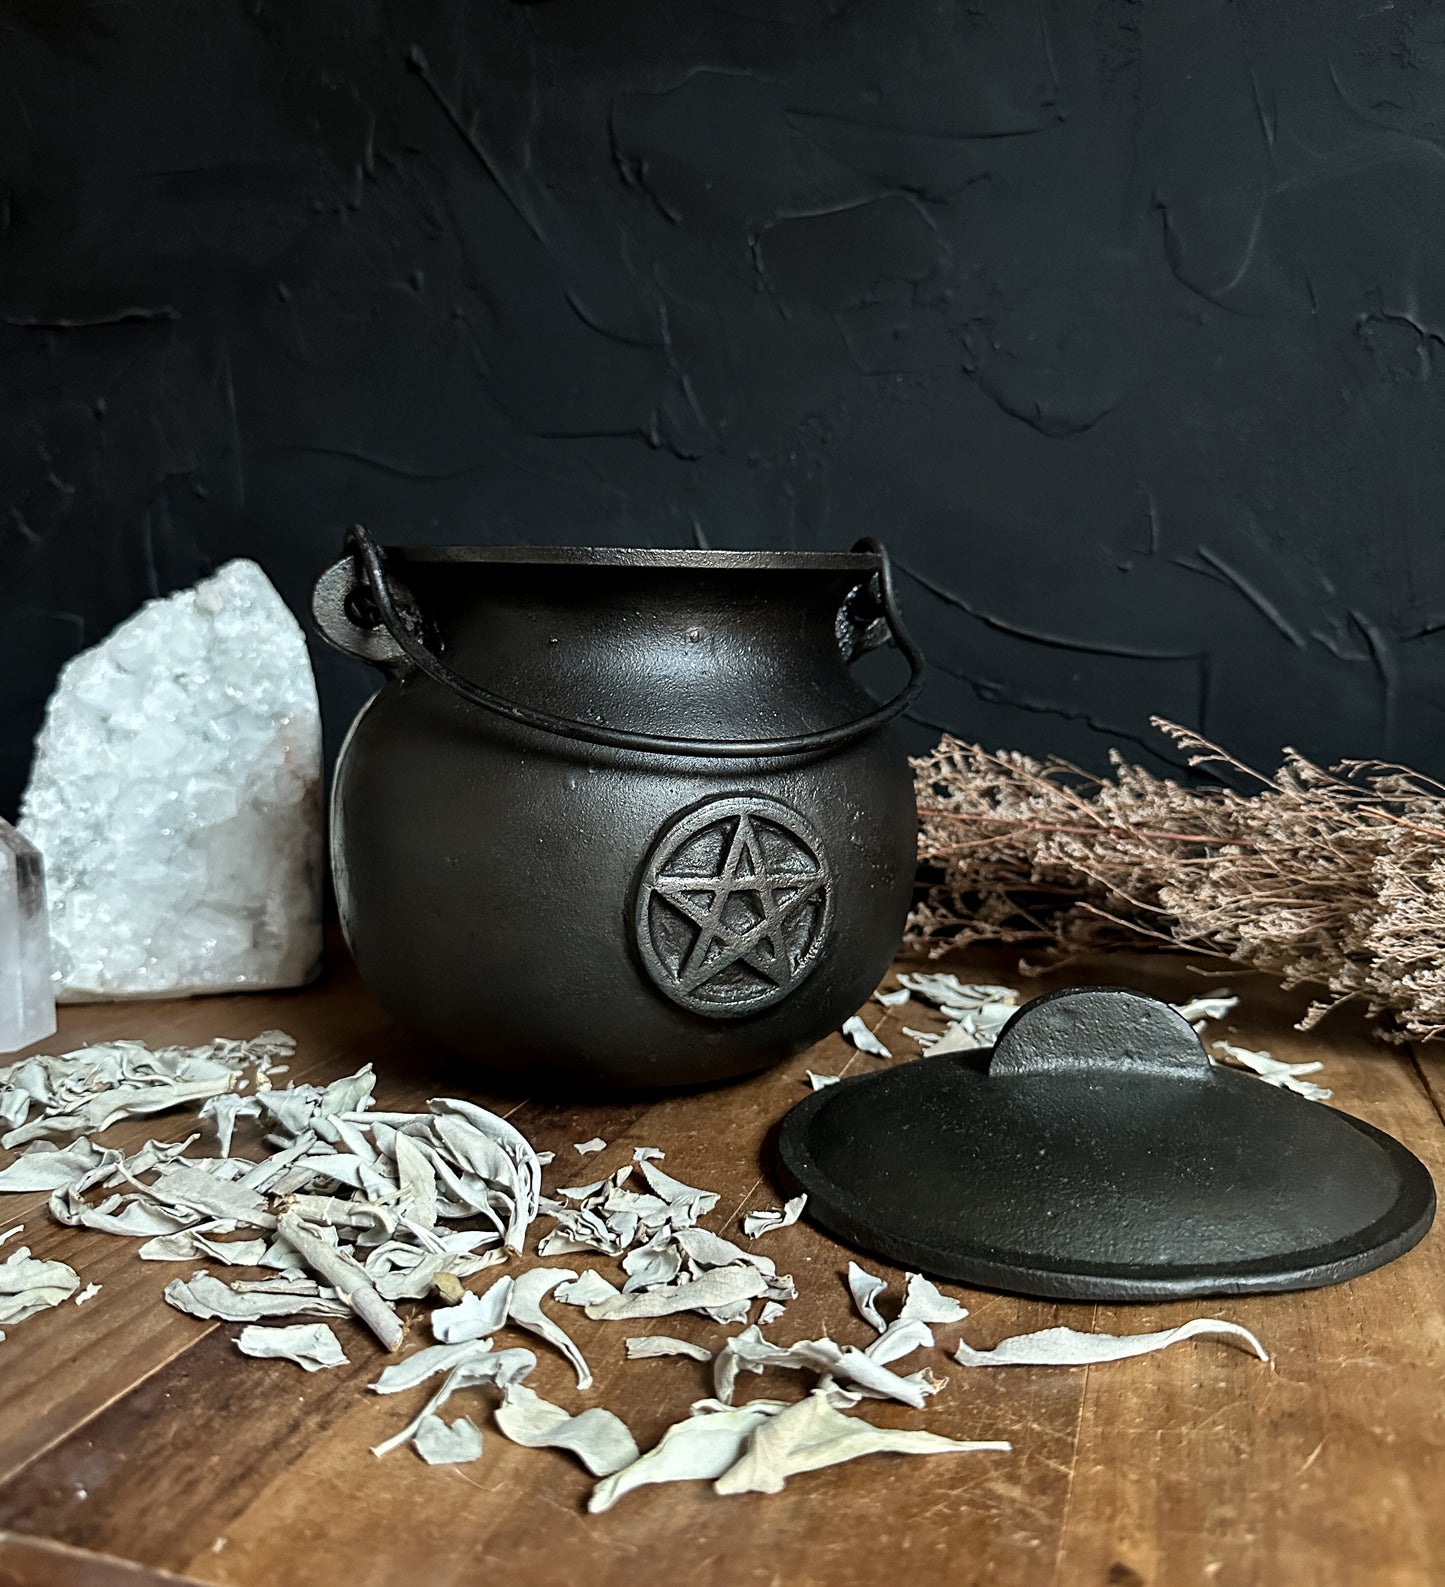 A large black cast iron cauldron, perfect for rituals, incense burning, and adding a touch of magic to your space. Witch Altar must have!